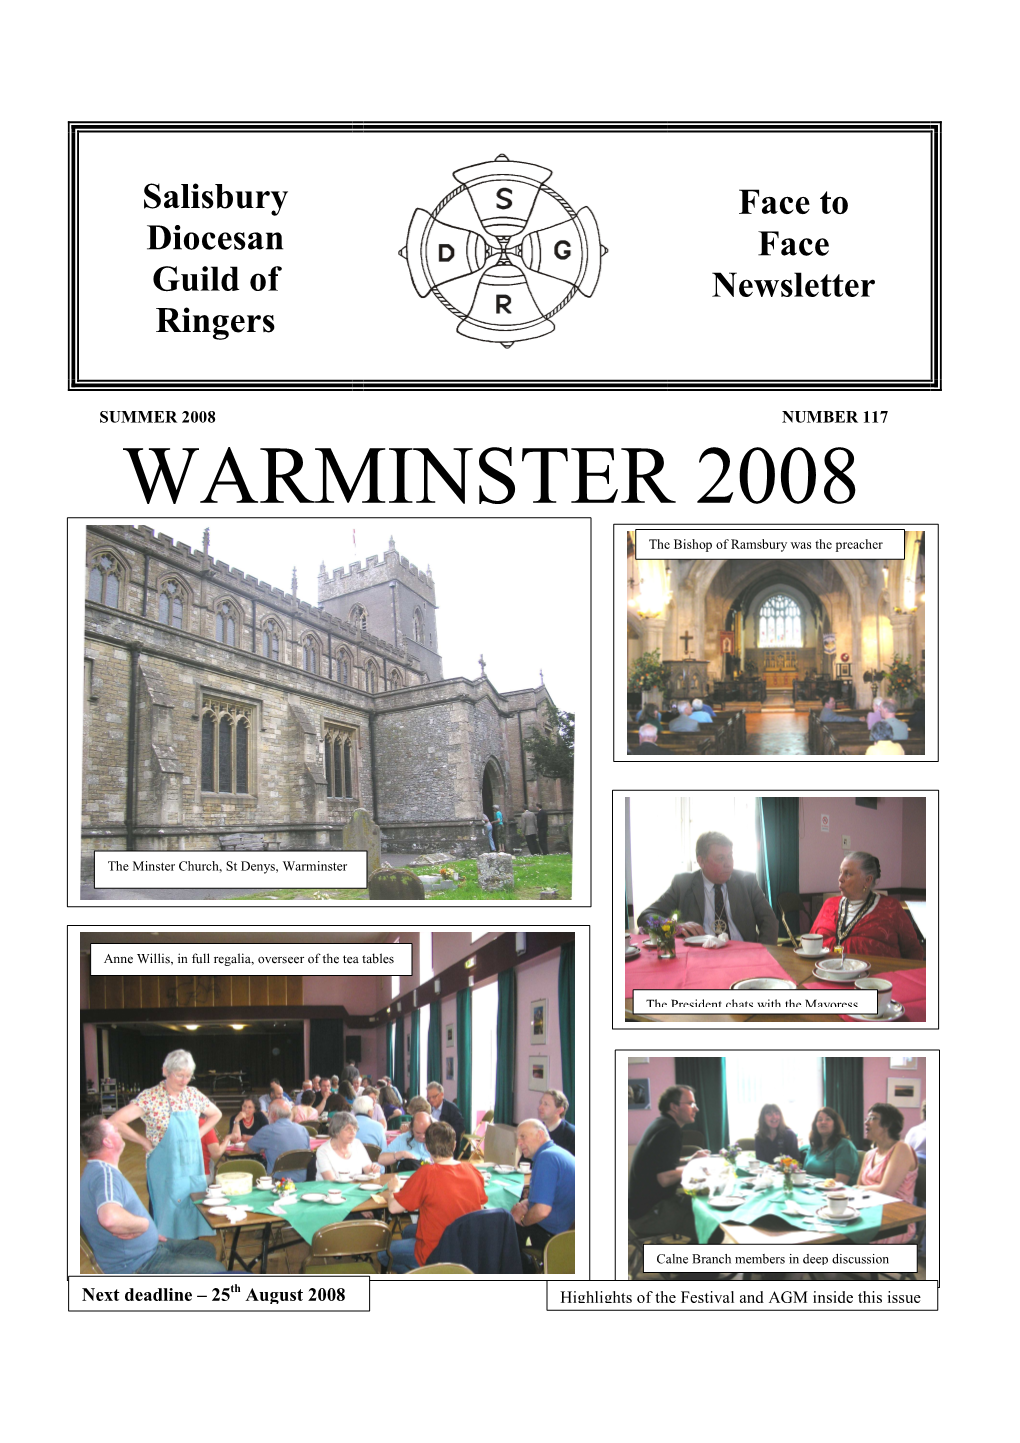 Face to Face’ Is the Acknowledged Newsletter of the Salisbury Diocesan Guild of Ringers